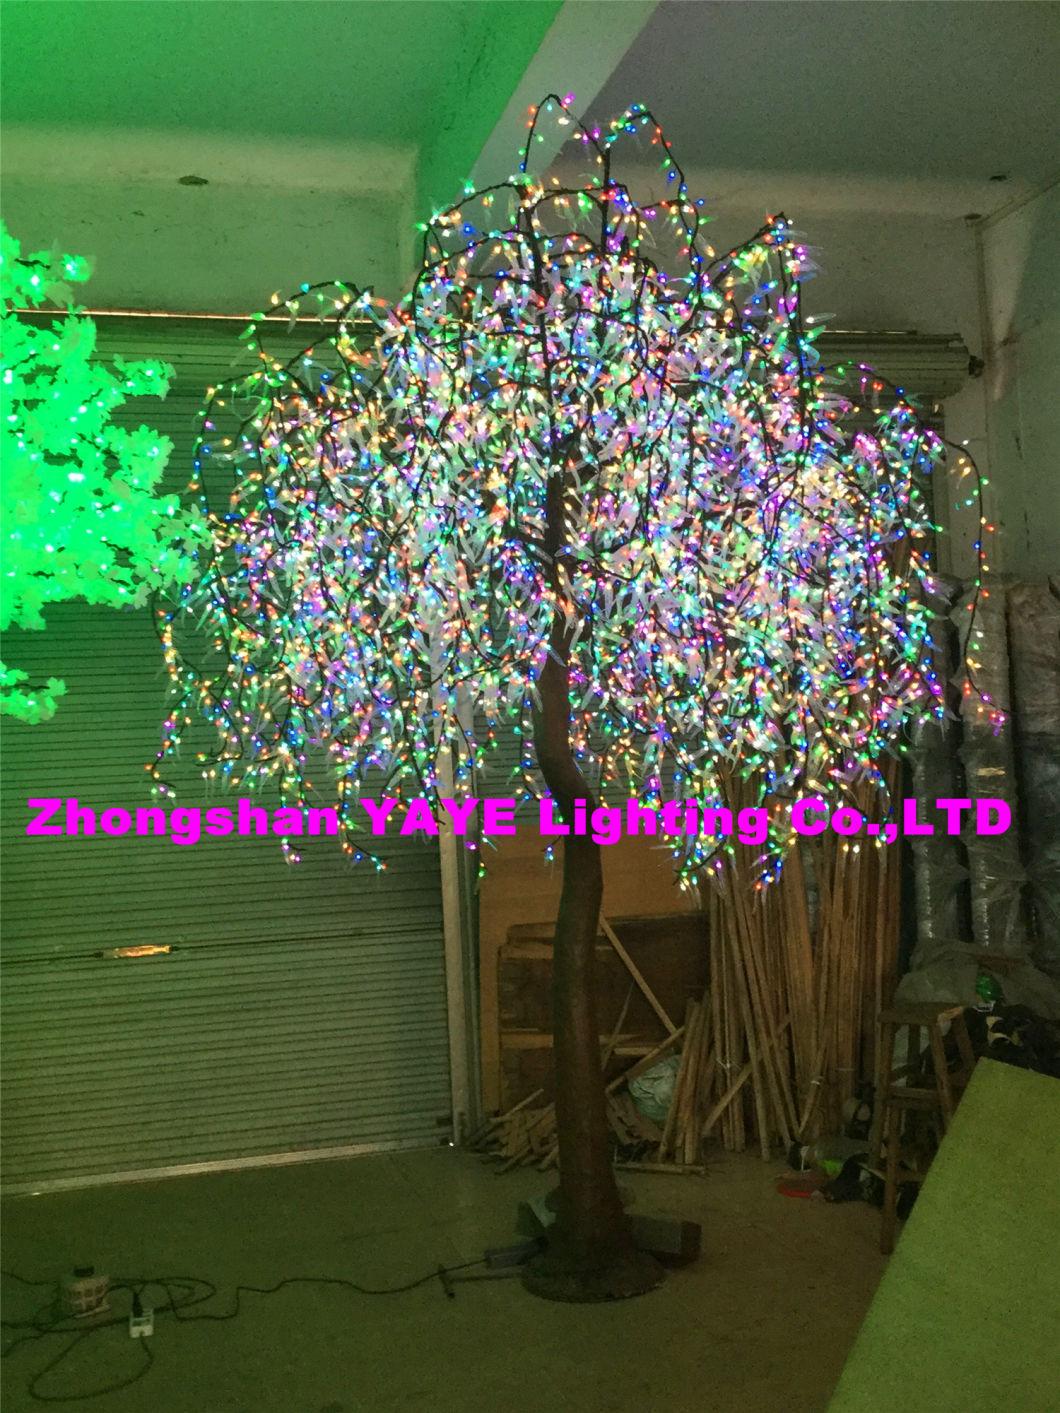 Yaye 2021 High Quality Competitive Price Waterproof IP65 LED Willow Tree Light Indoor Outdoor Using